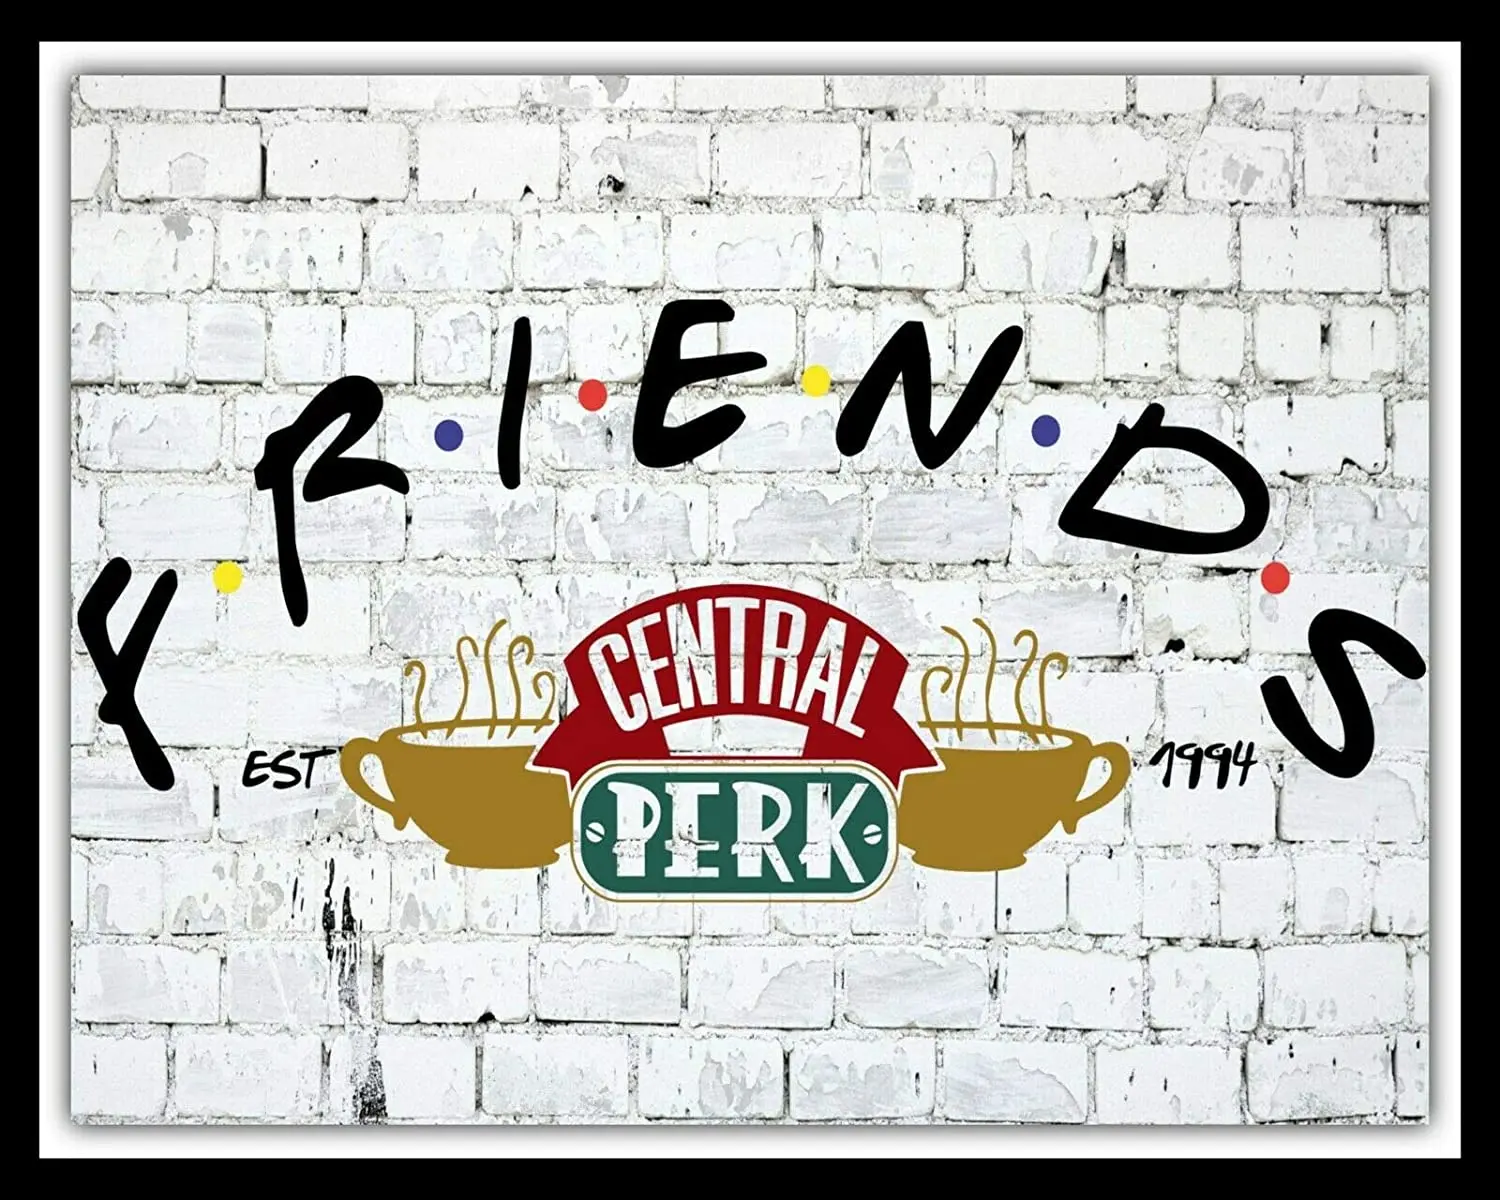 

Friends Central Perk New York Theme Metal Tin Signs 8x12 Inch Wall Decor Sign Home Decoration Wall